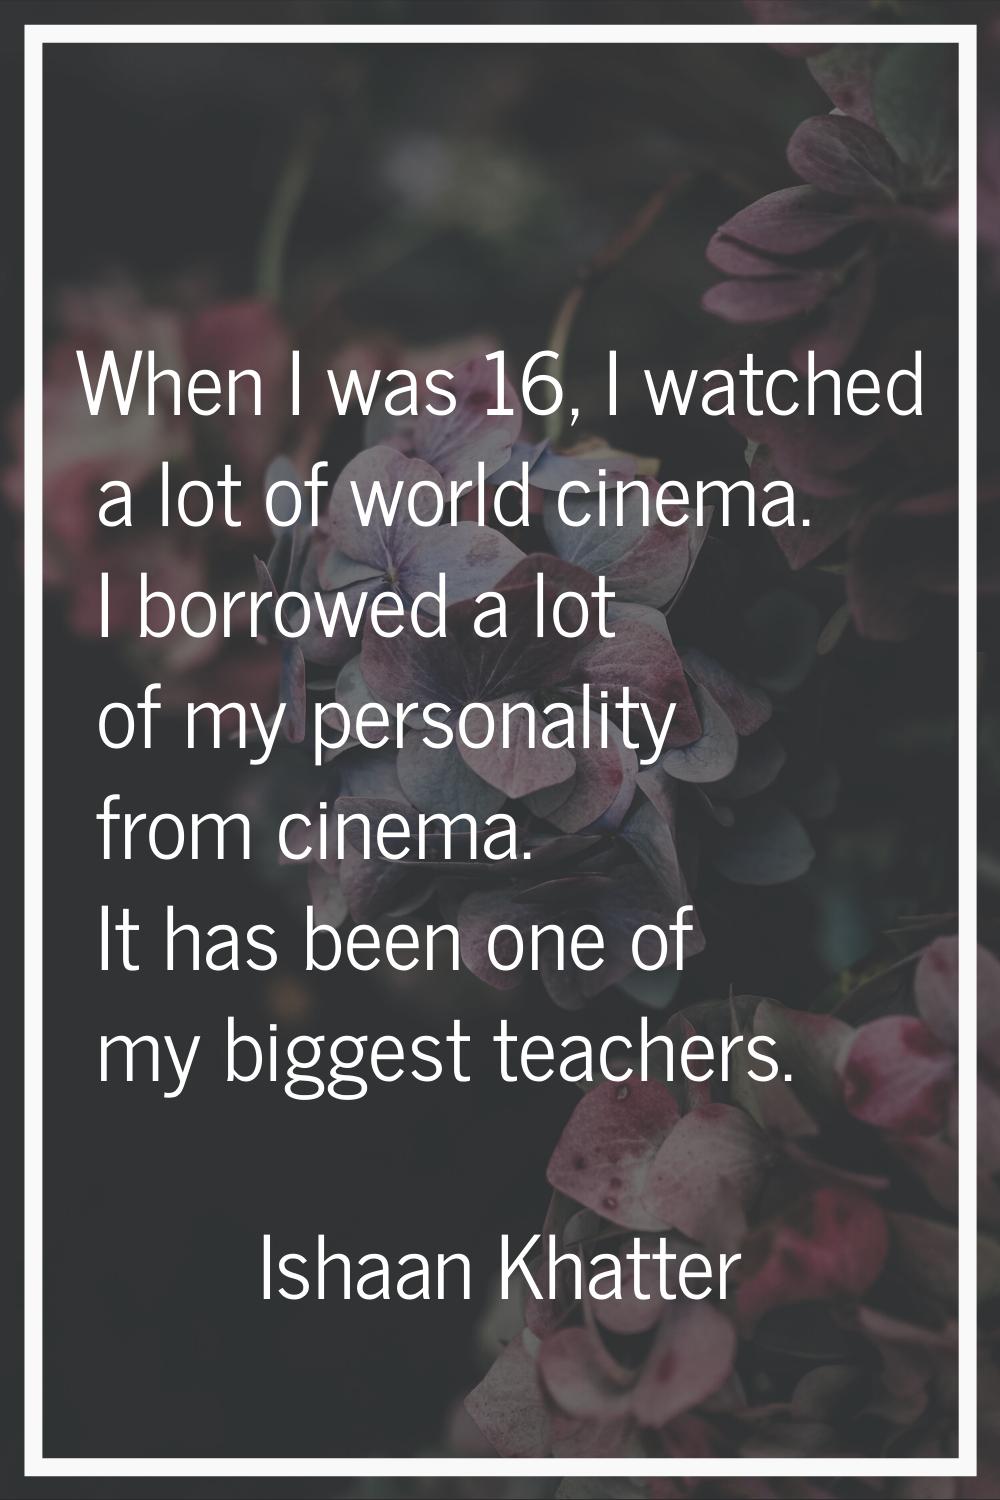 When I was 16, I watched a lot of world cinema. I borrowed a lot of my personality from cinema. It 